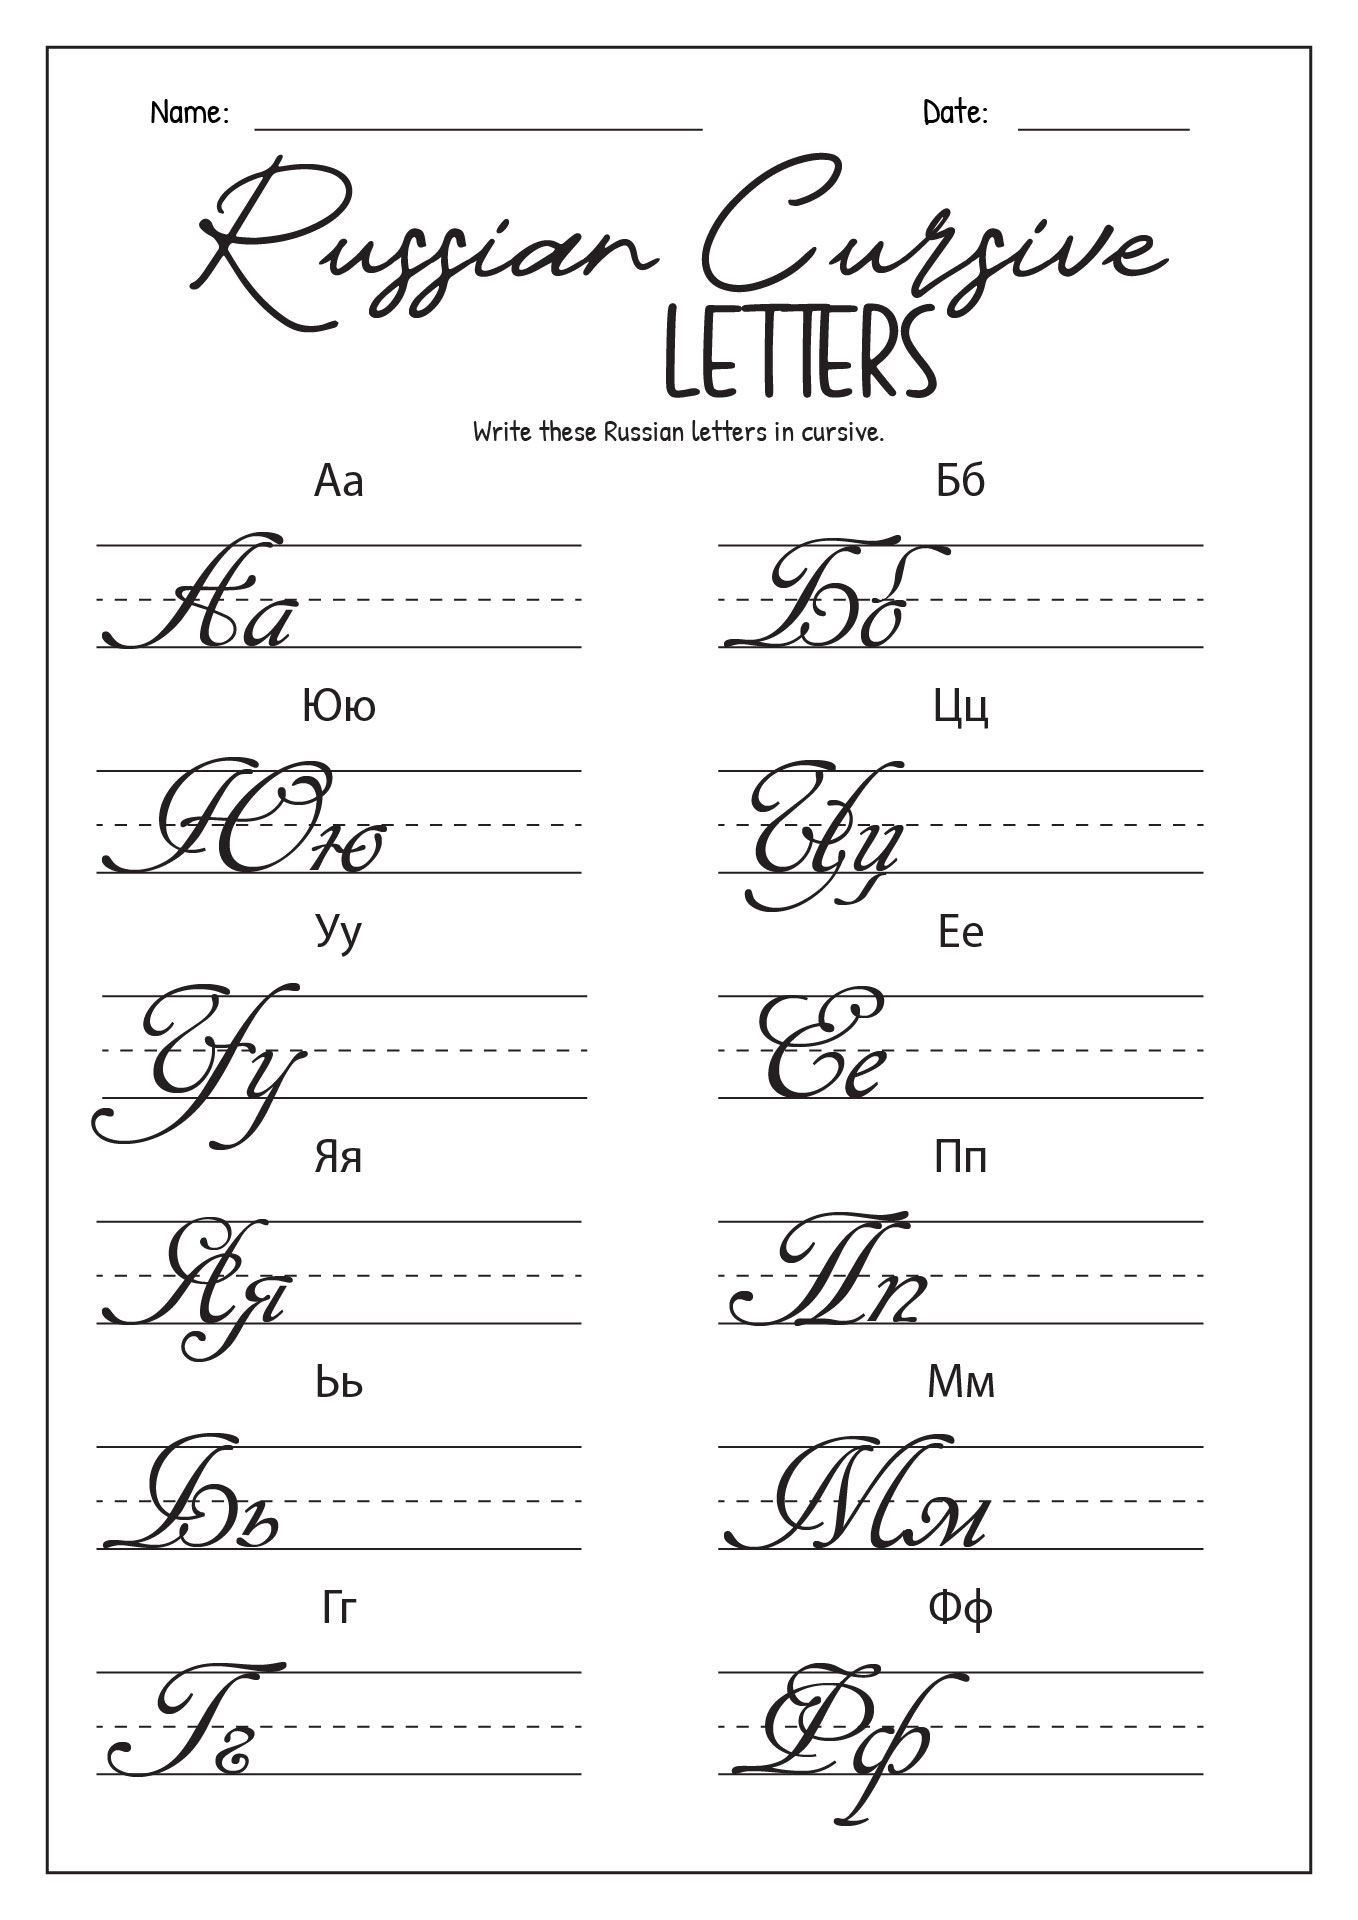 Russian Cursive Handwriting Practice Letters Image